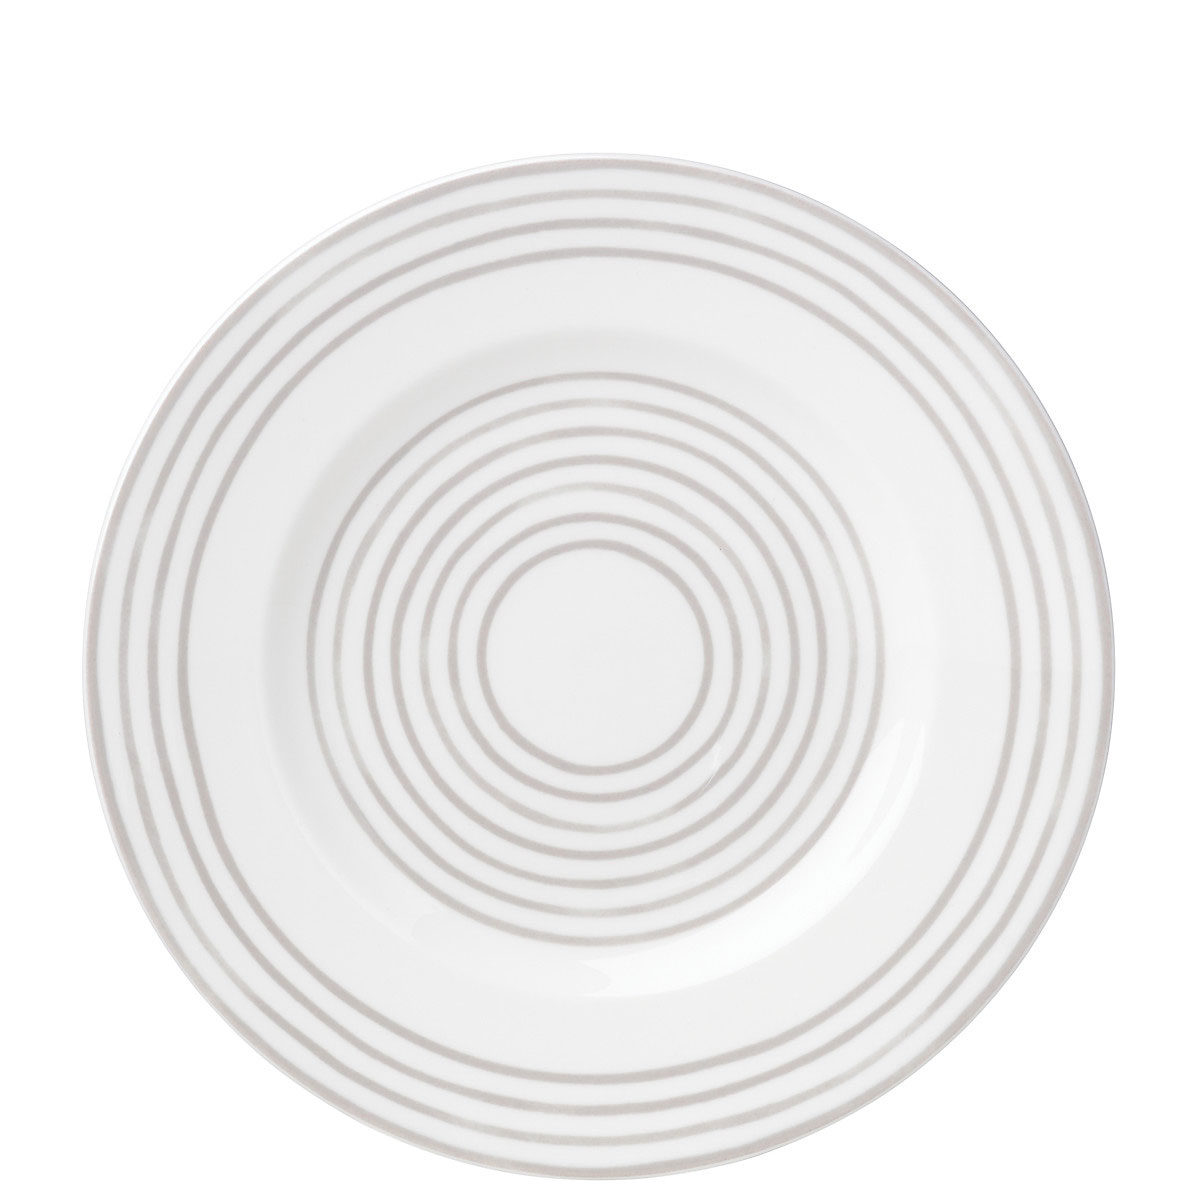 Kate Spade China by Lenox, Charlotte Street West Grey Accent Plate, Single